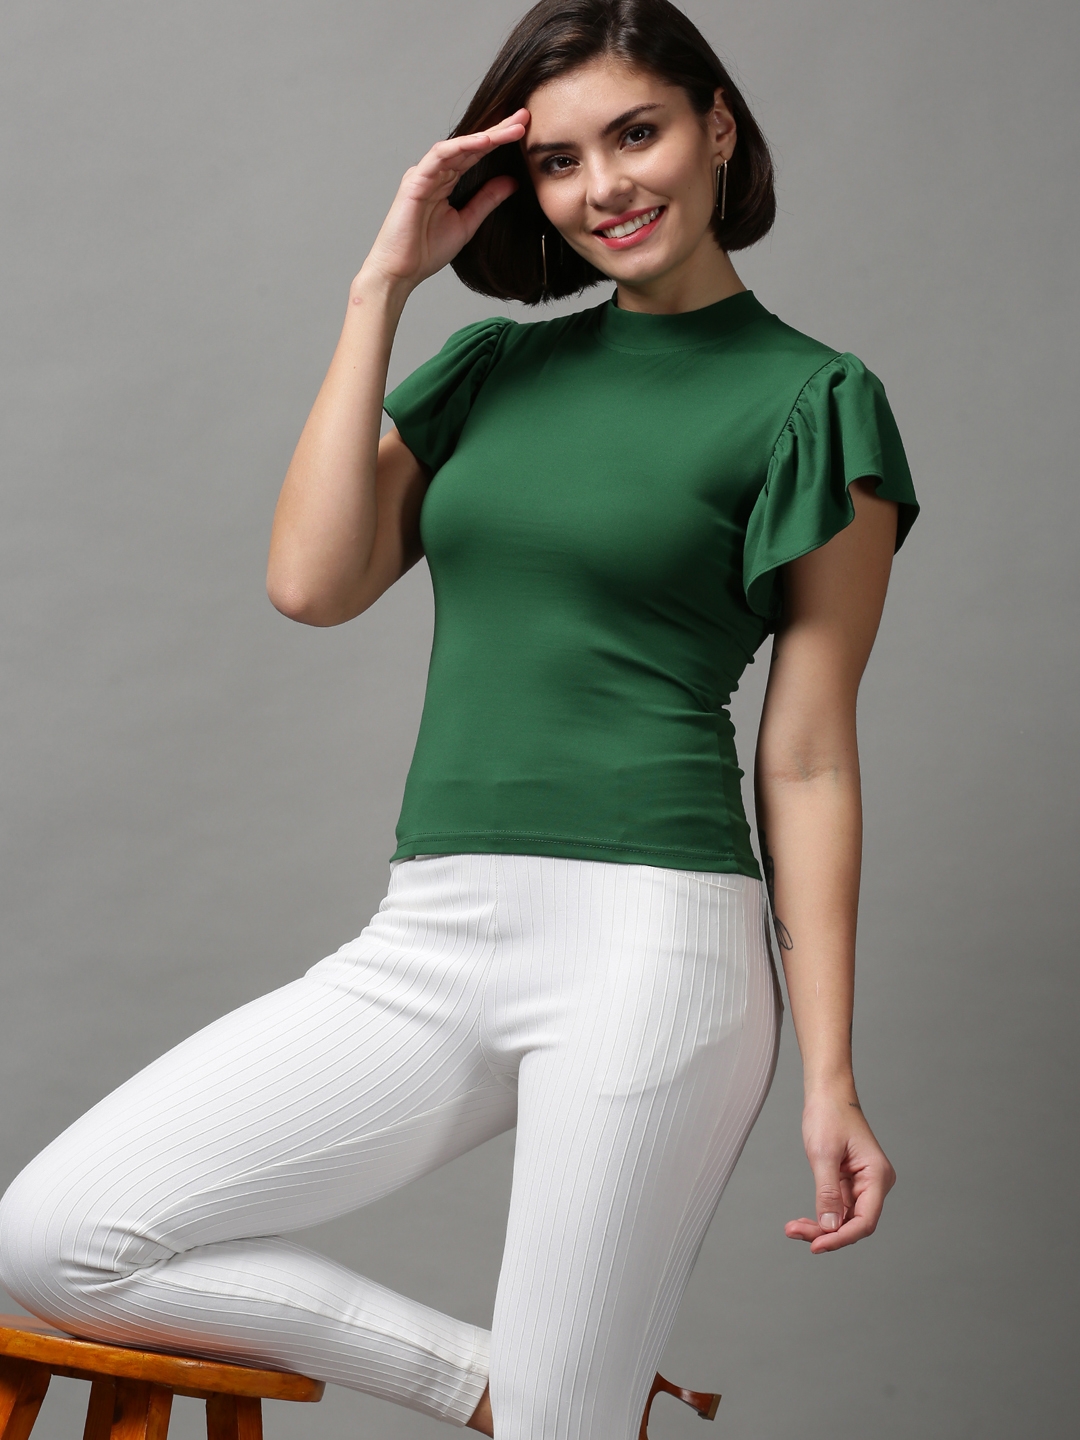 SHOWOFF Women's High Neck Green Fitted Regular Top